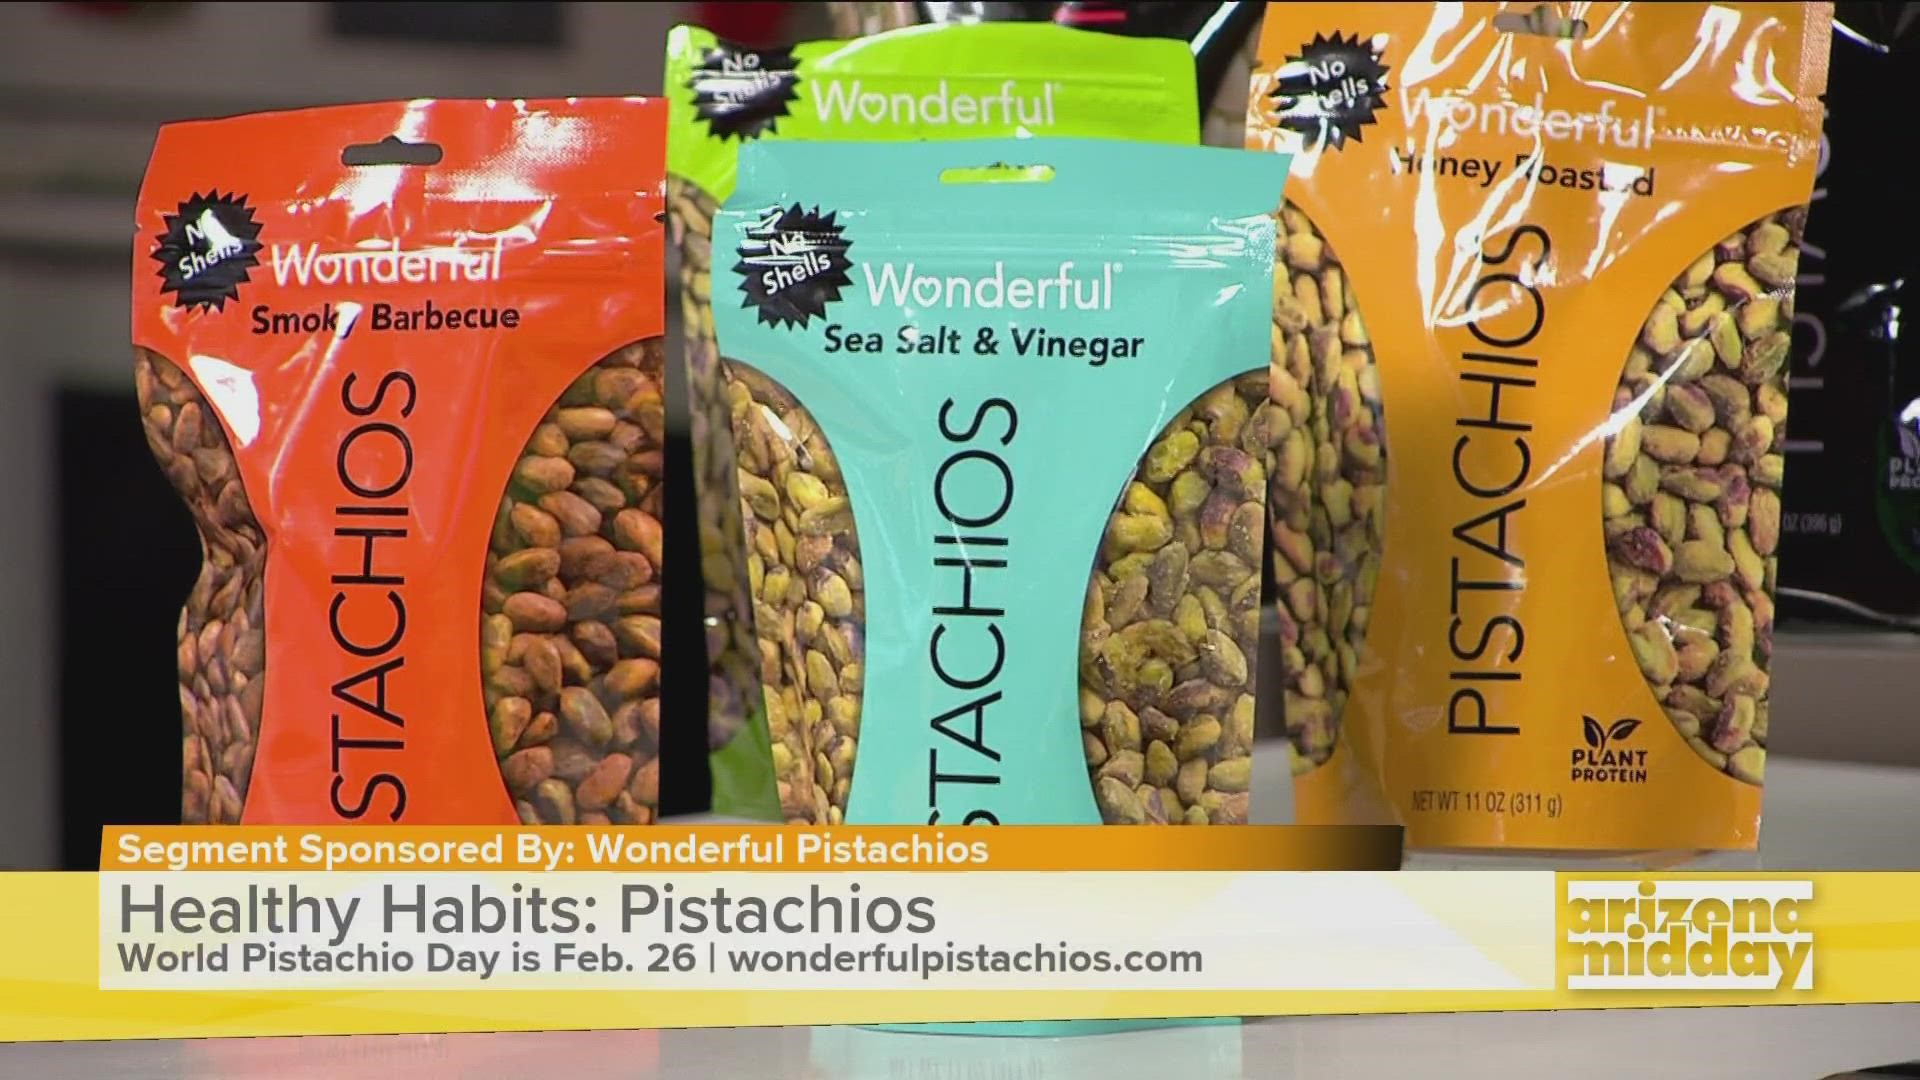 Dietician Kristen Carli shows how you can incorporate pistachios into your everyday meals for healthier eating!